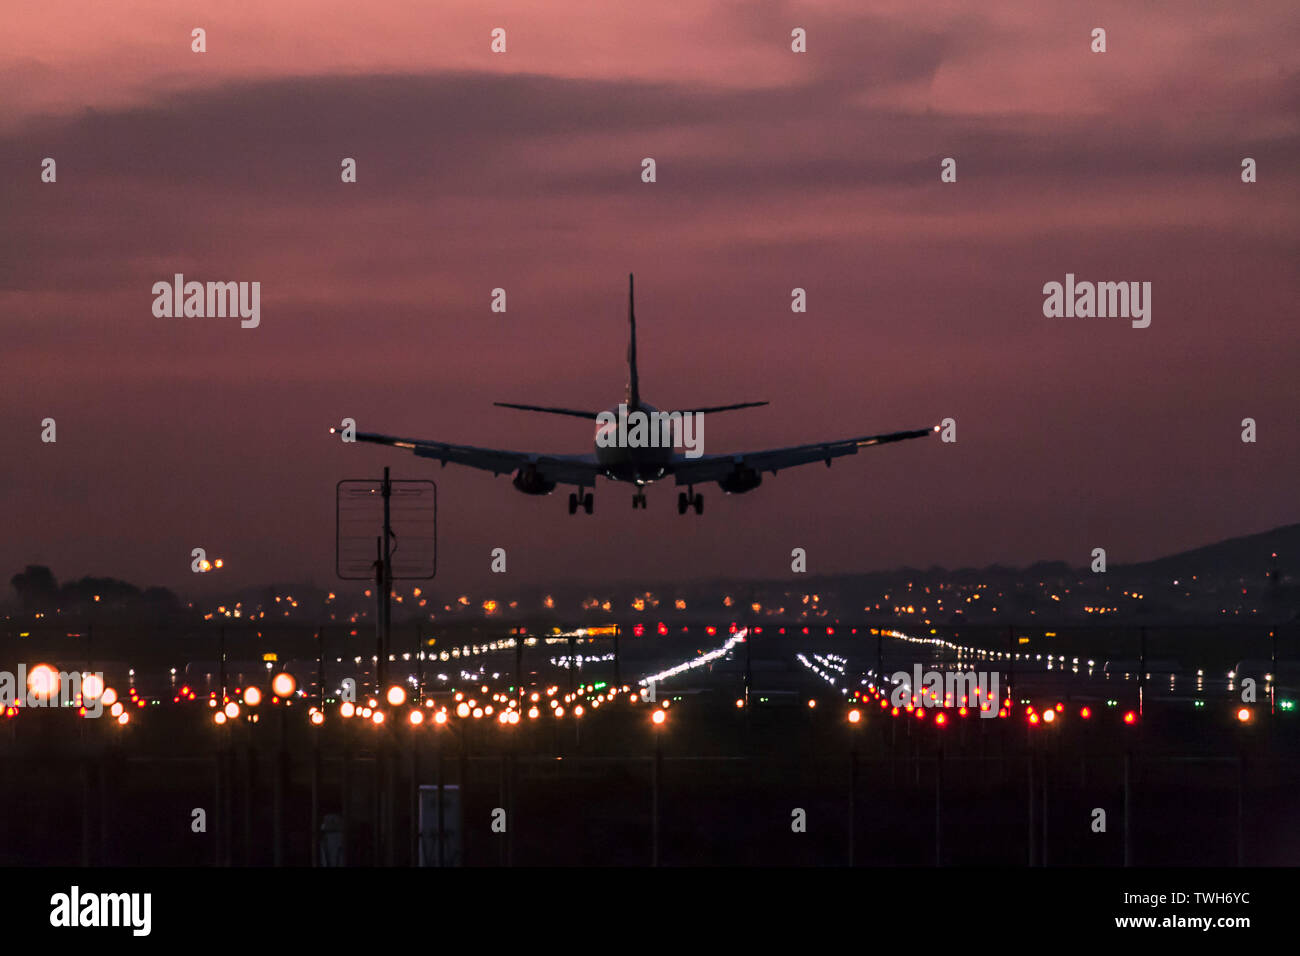 Passenger aircraft landing at the Cape Town International Airport at dusk with the landing strip clearly lit up. Stock Photo